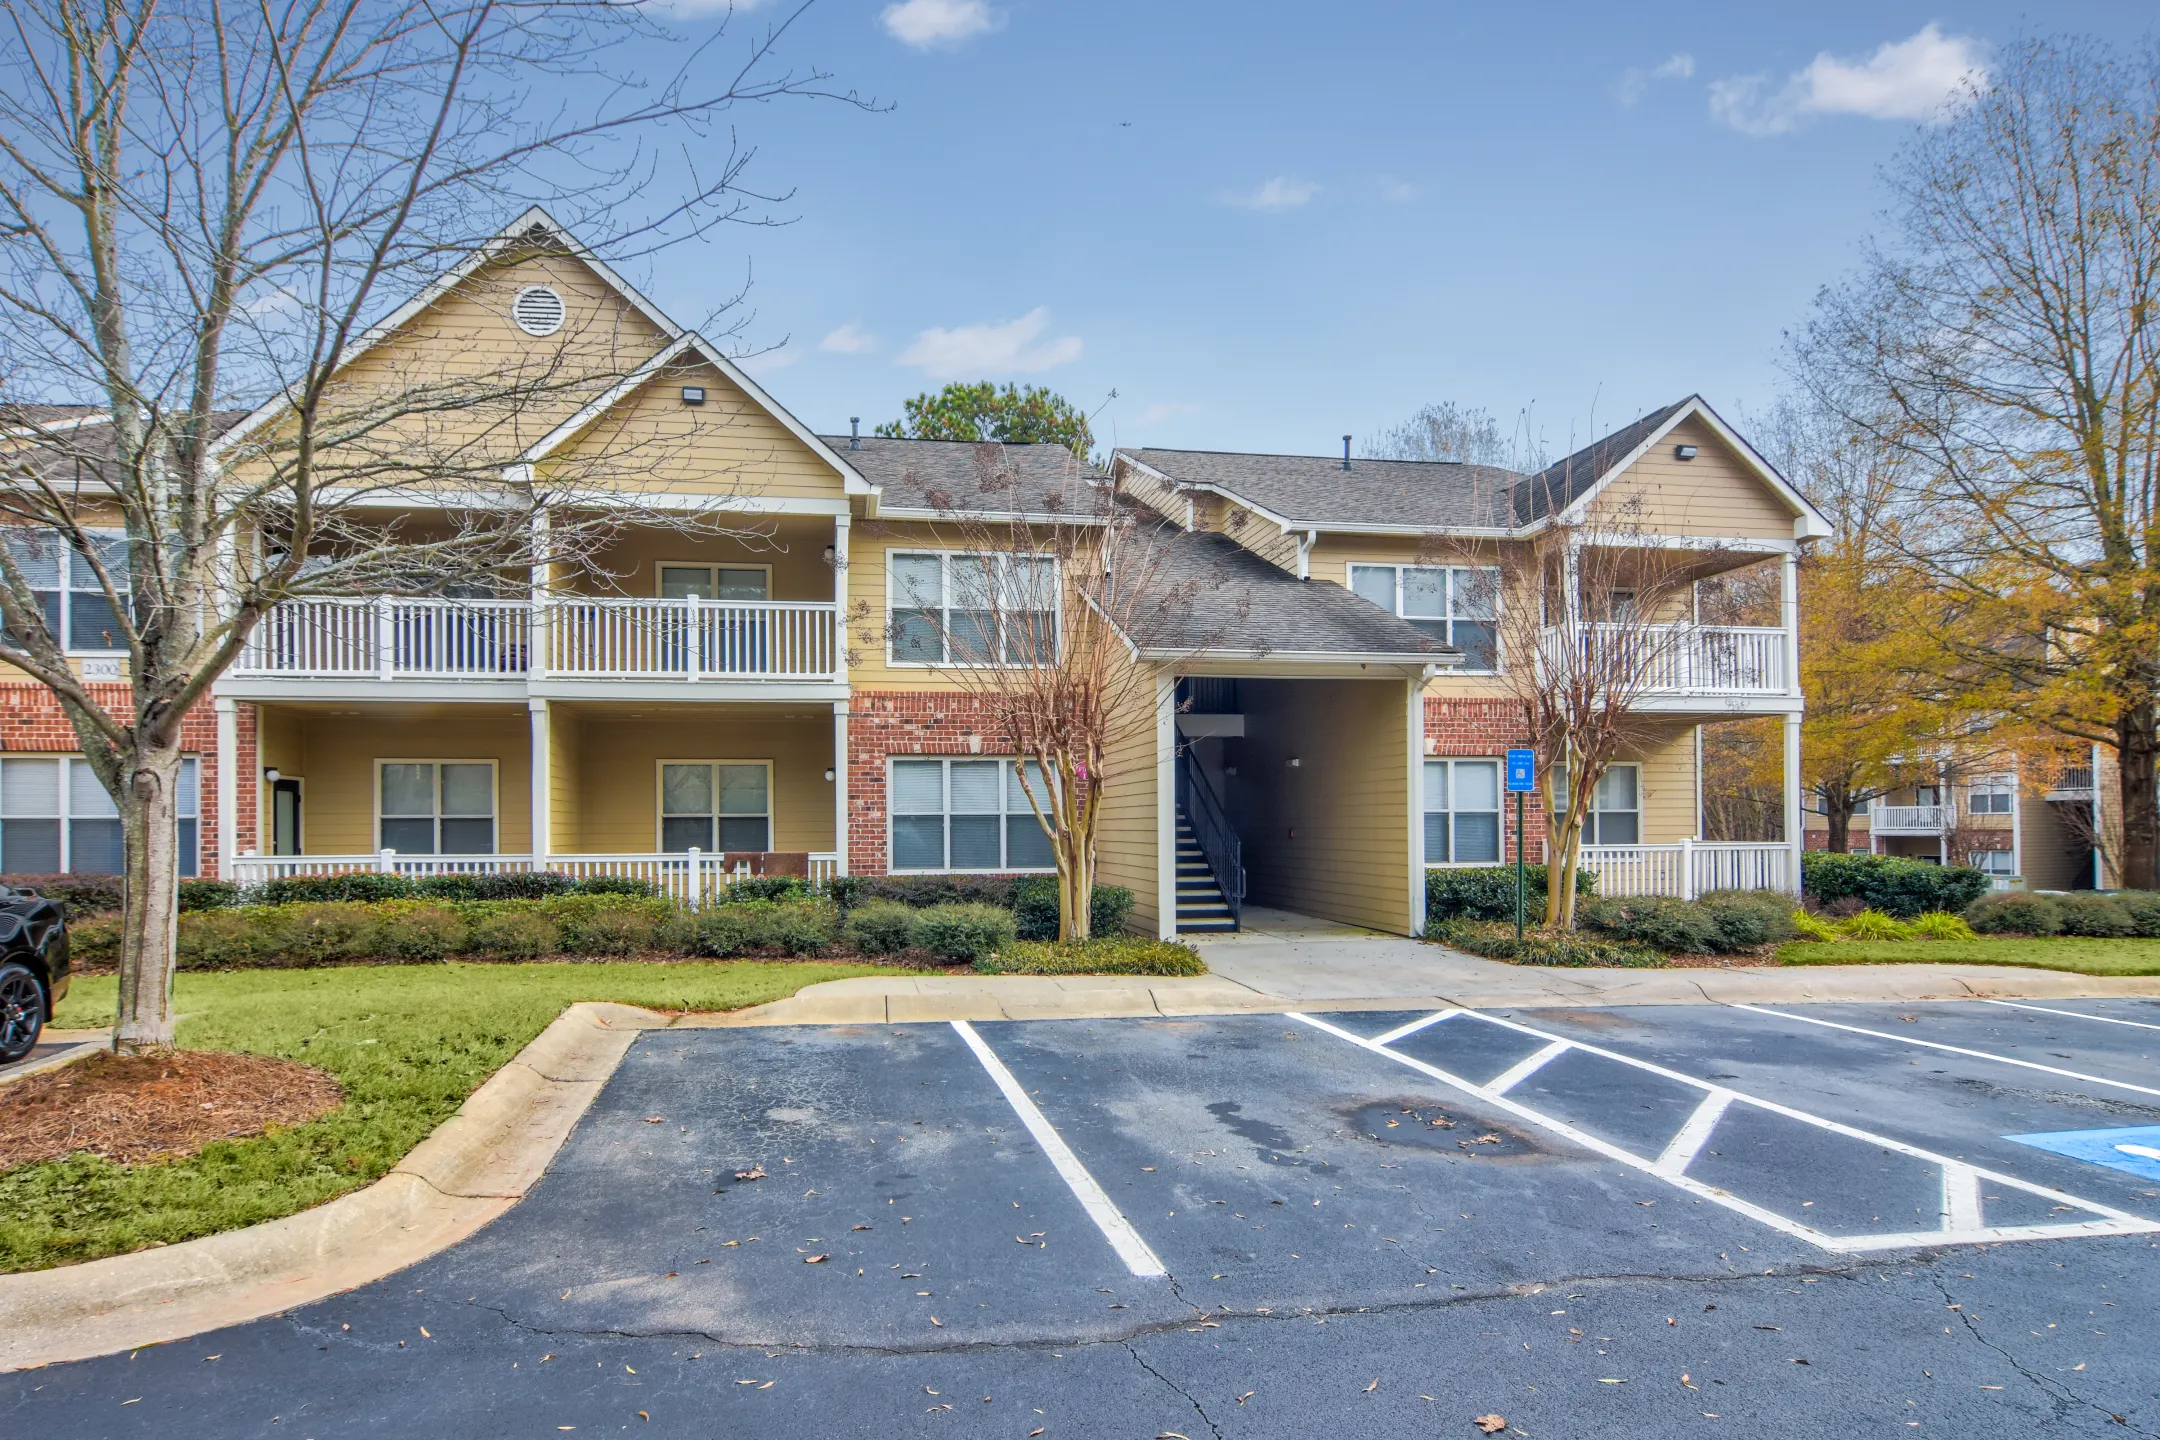 Building - Manchester Place Apartments - Lithia Springs, GA